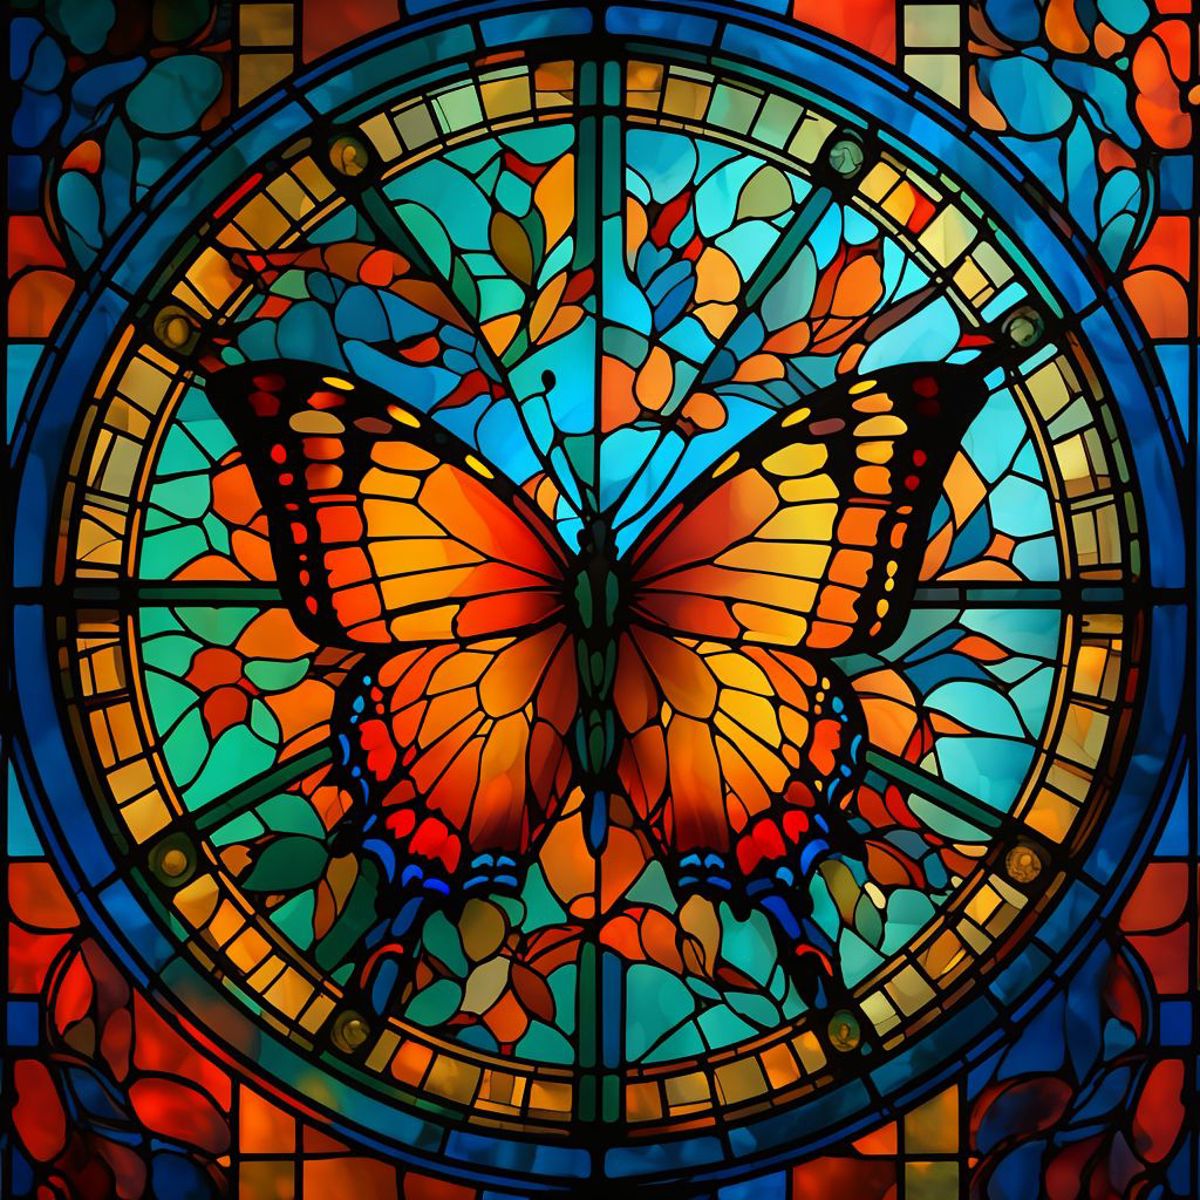 Stained Glass image by Mord